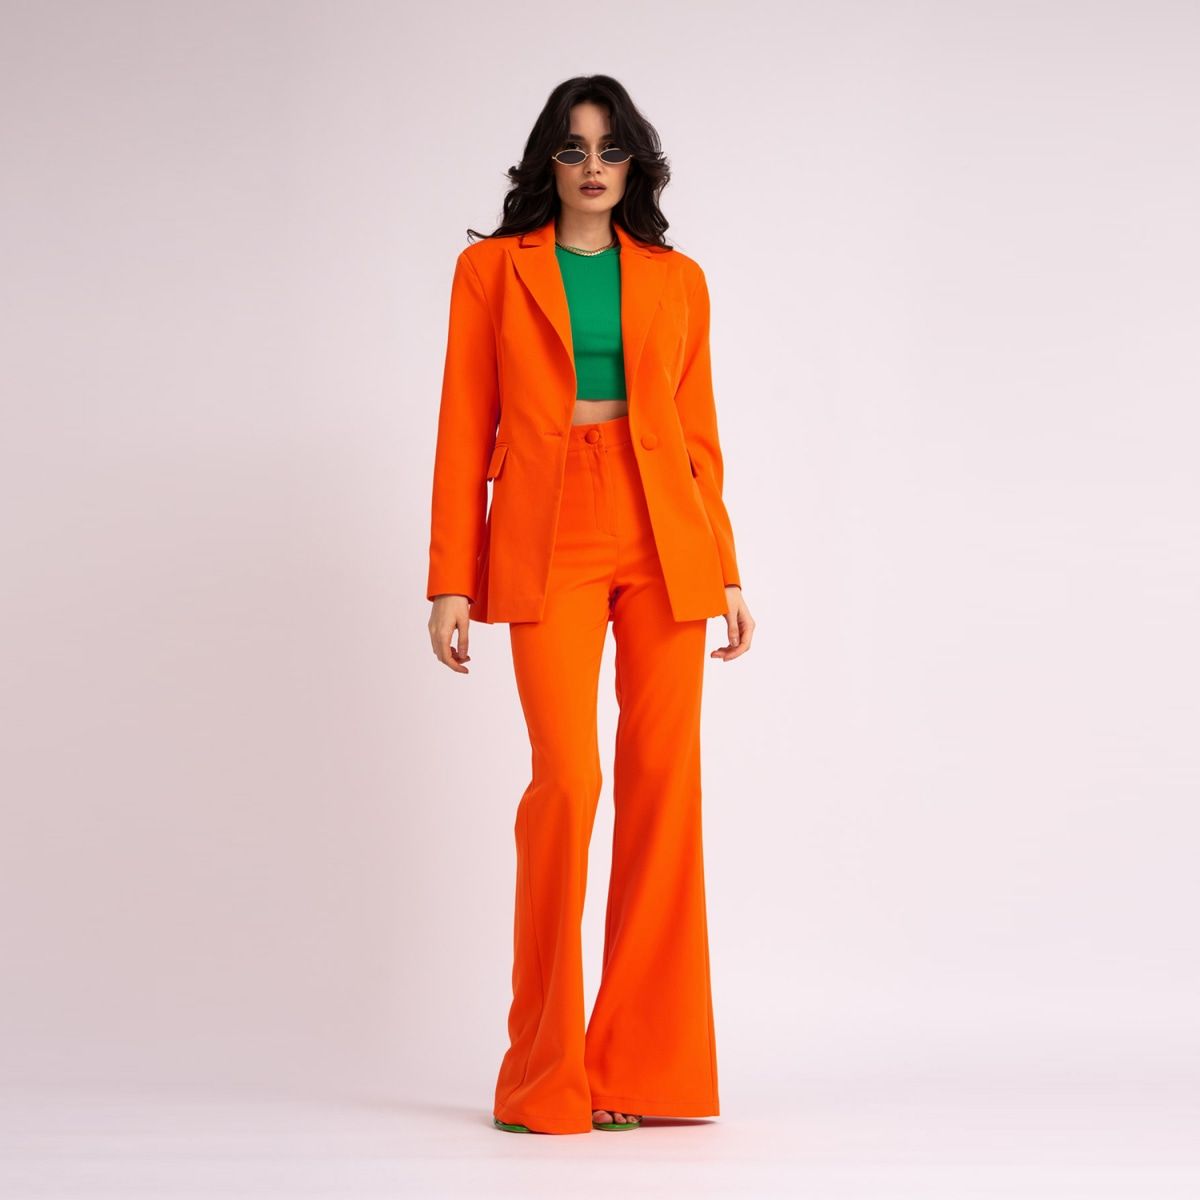 Neon Orange Suit With Slim Fit Blazer And Flared Trousers | Wolf & Badger (US)